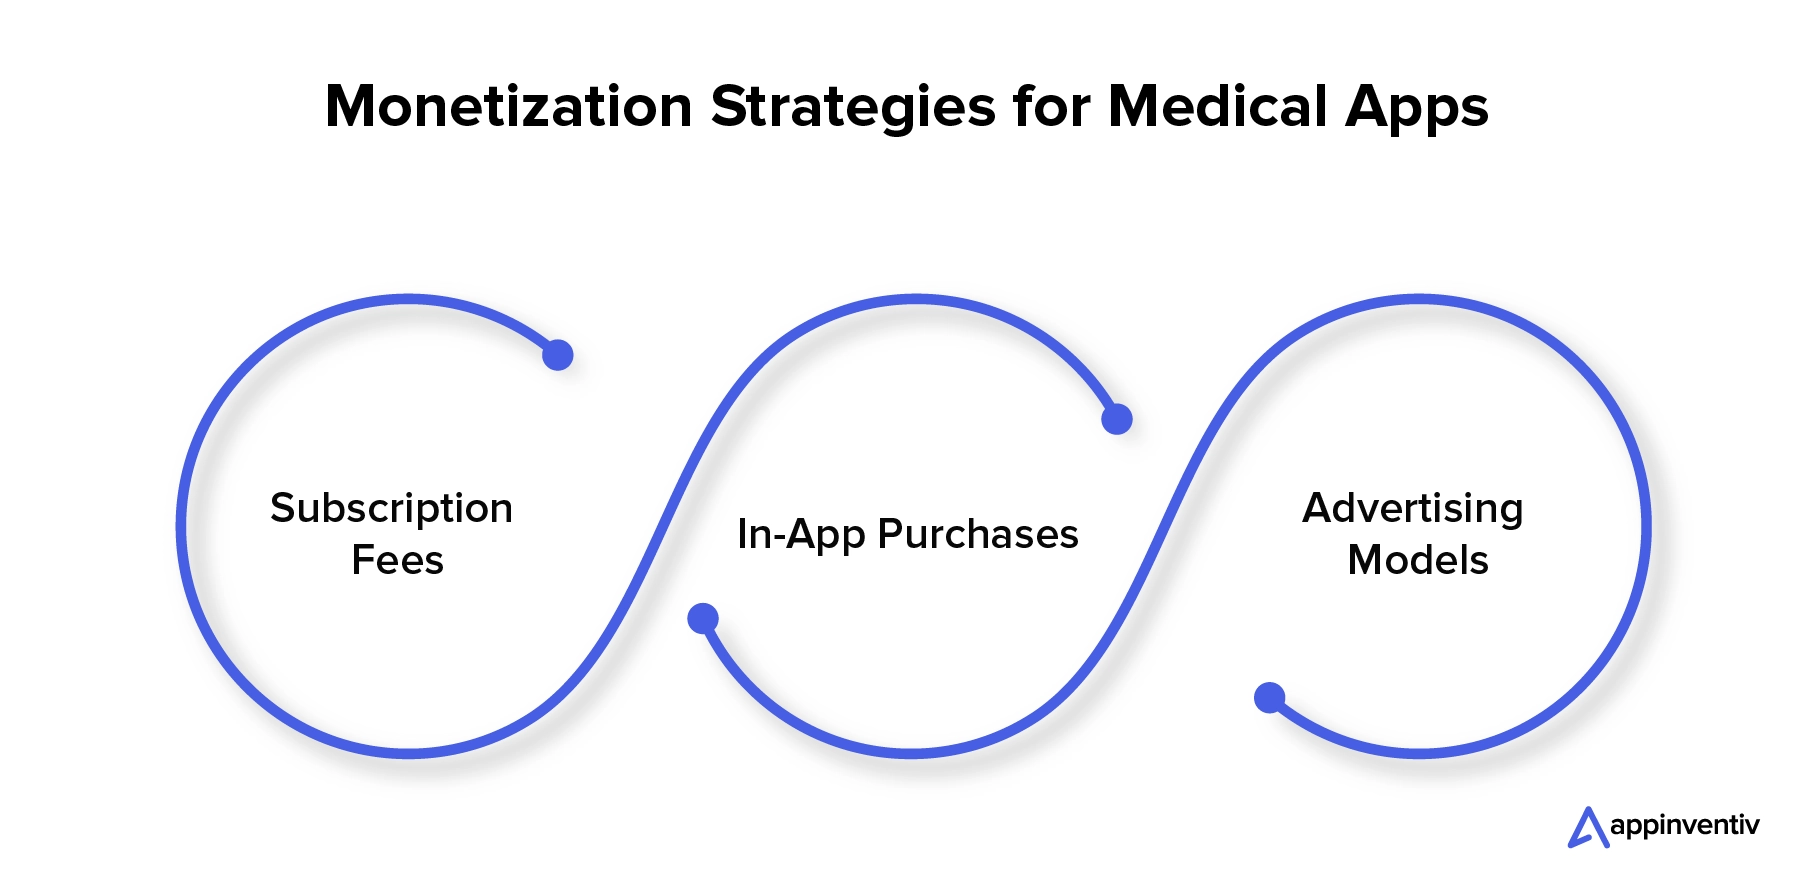 Monetization Strategies for Medical Apps